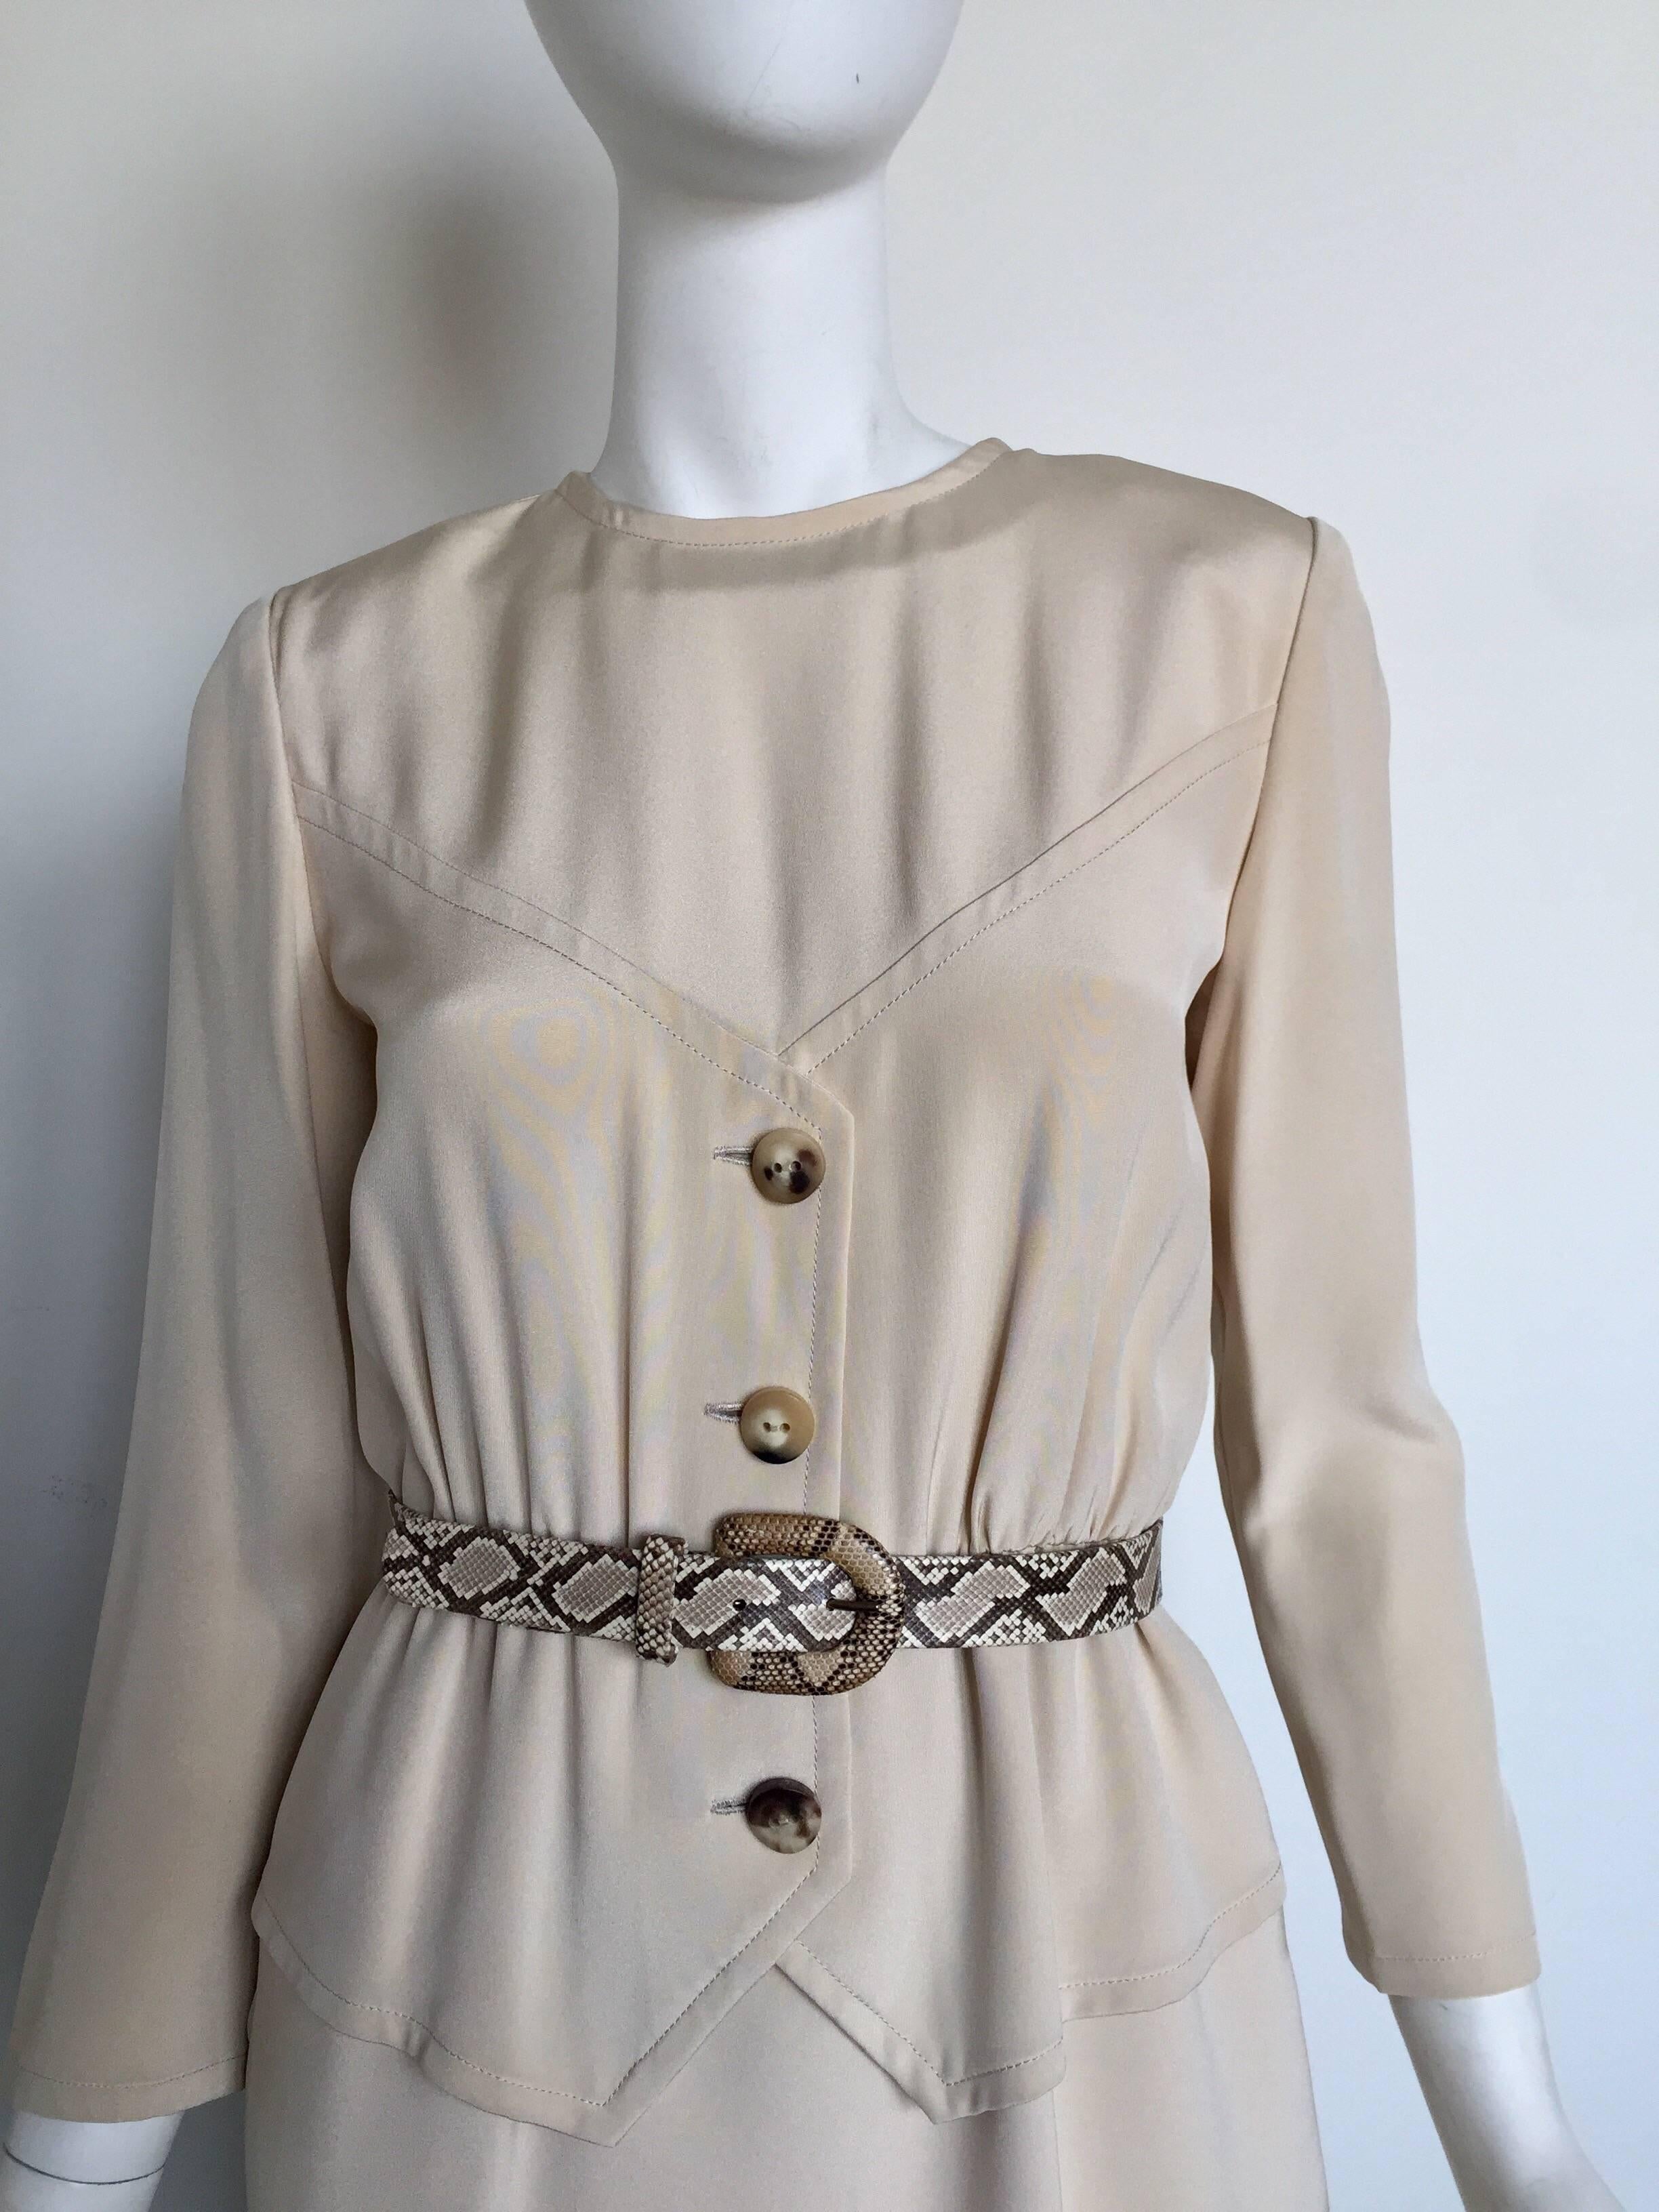 This Bill Bless dress and belt are from the 1980s. This long sleeved cream dress has a snakeskin matching belt to accent the waist. The dress is fully lined and has a hidden zipper back enclosure.  

BUST: 34